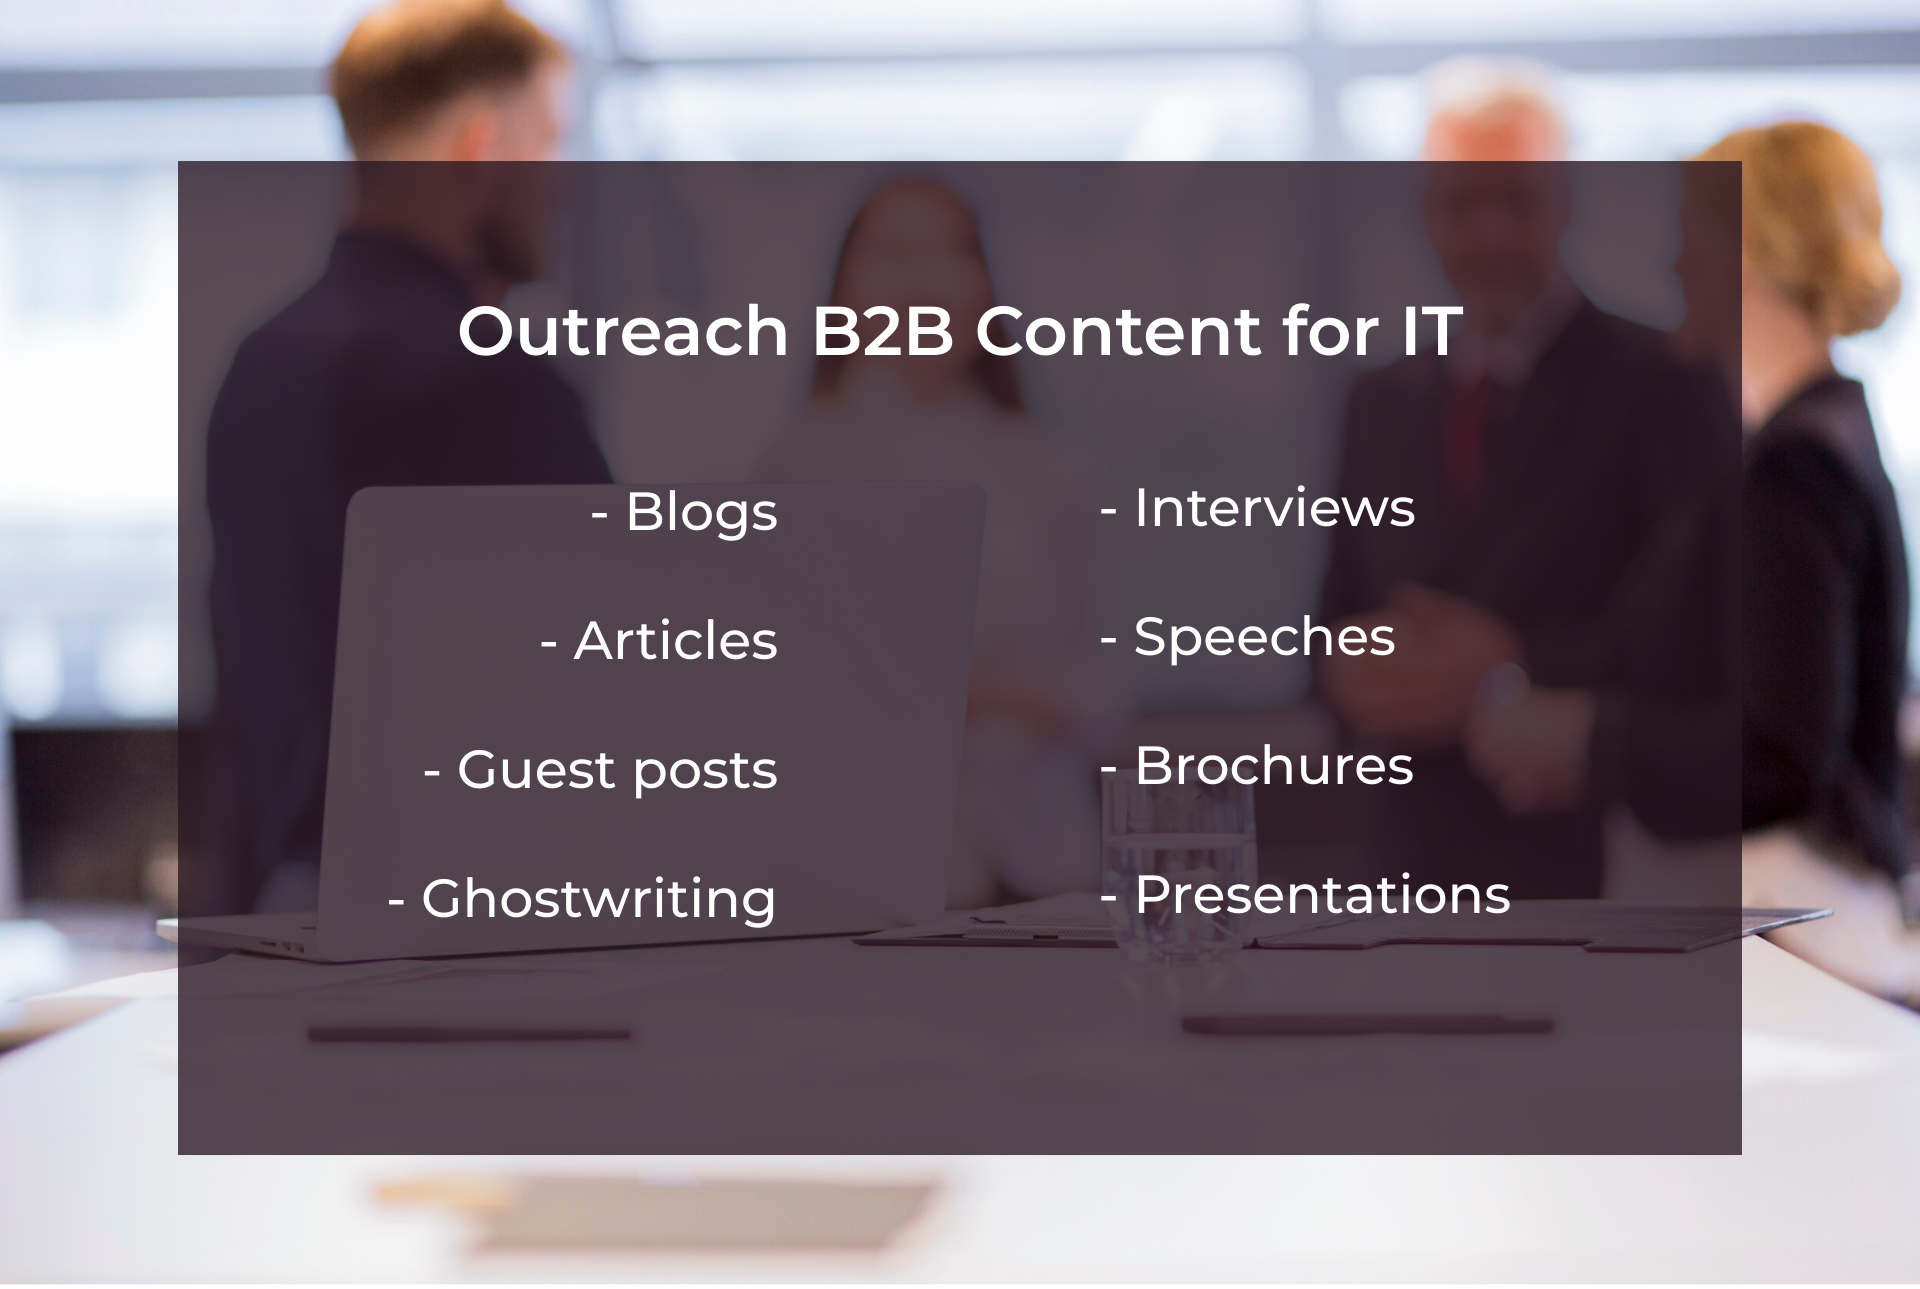 Outreach content for IT